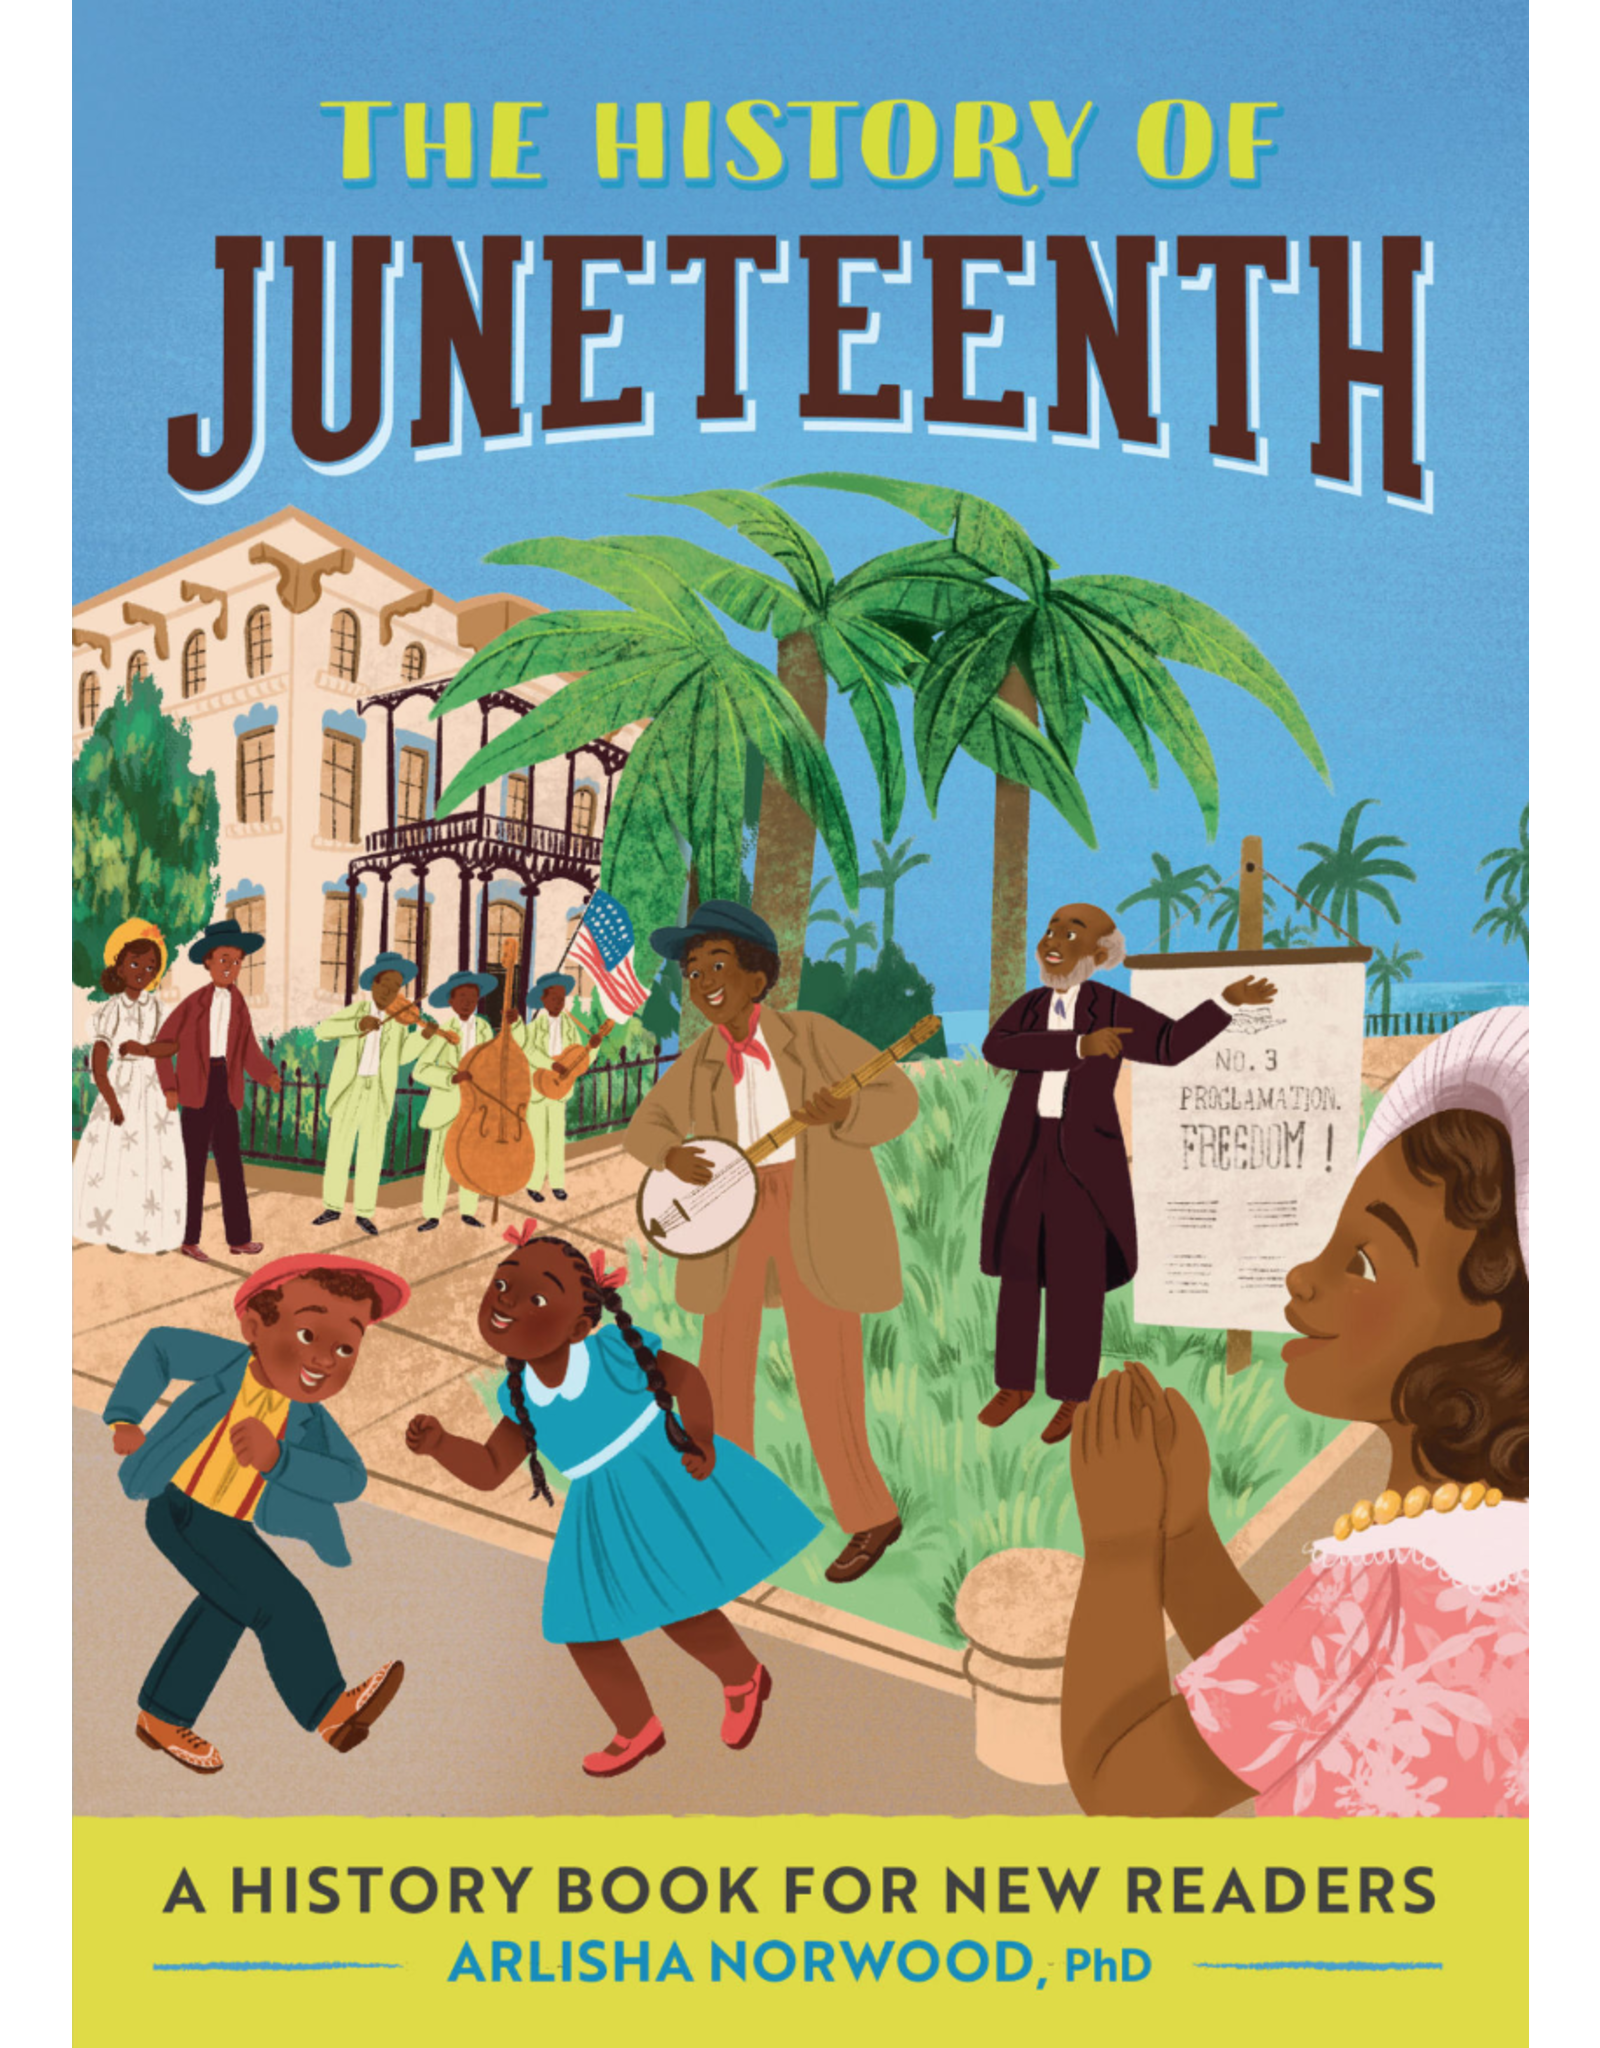 Children's Books History of Juneteenth: A History Book for New Readers